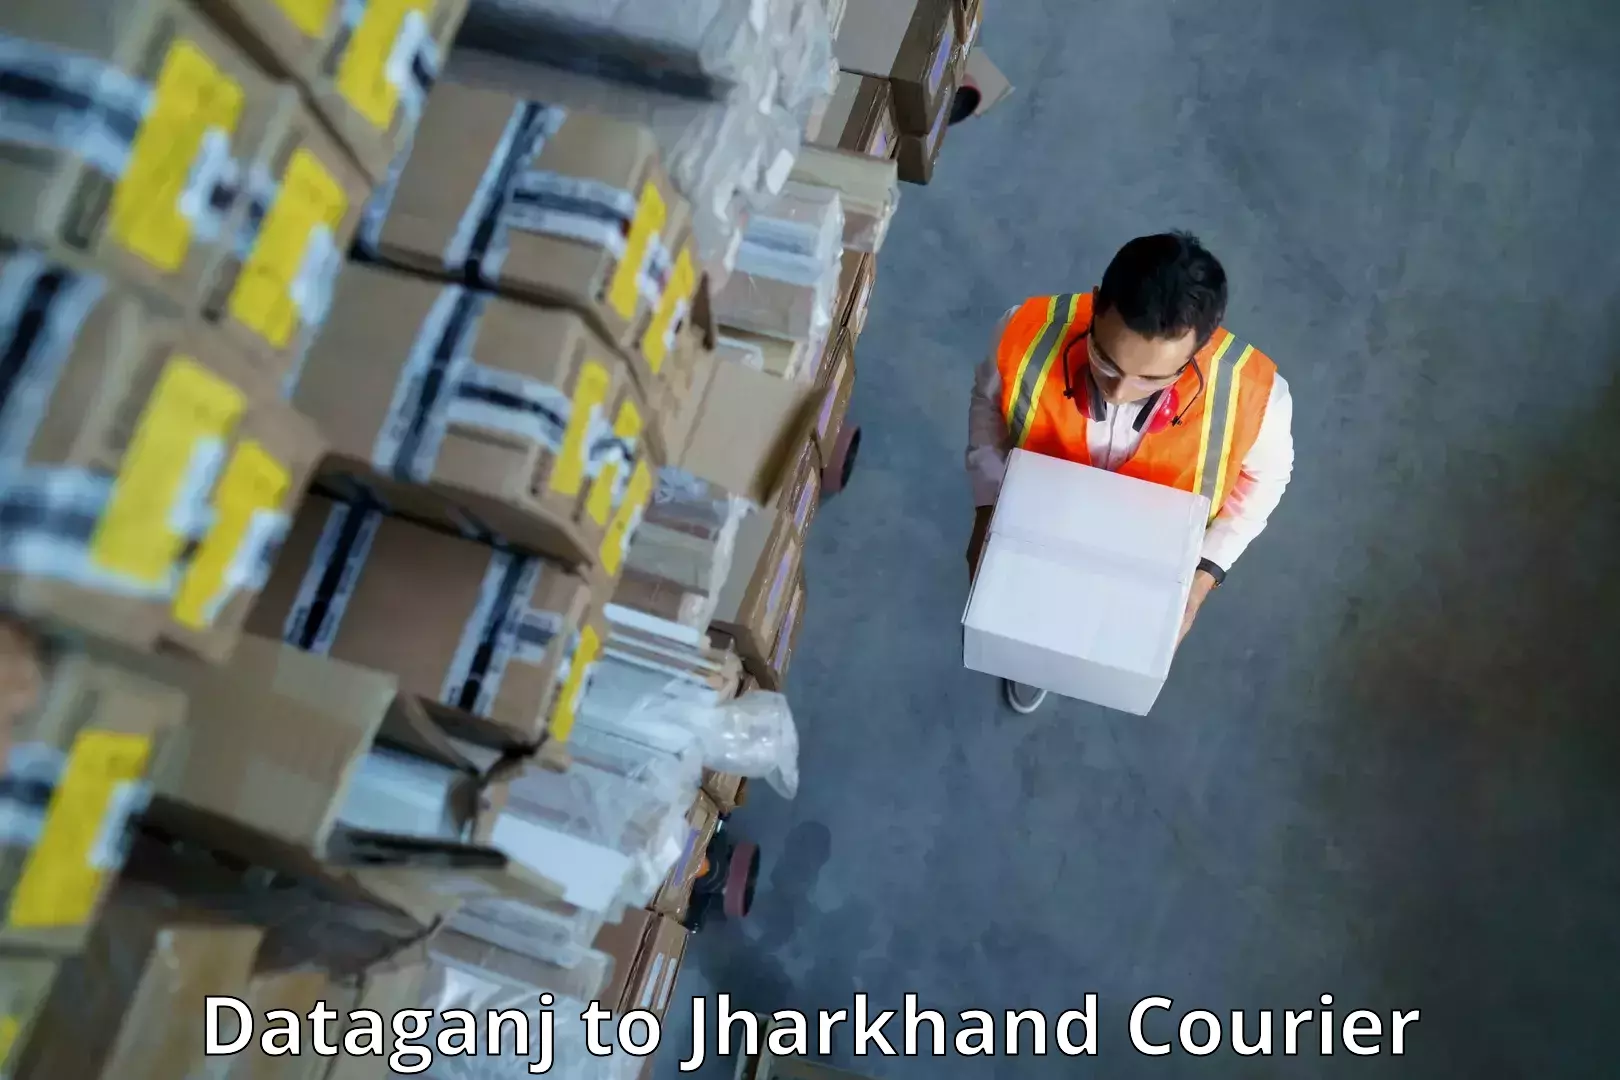 Global courier networks Dataganj to Jharkhand